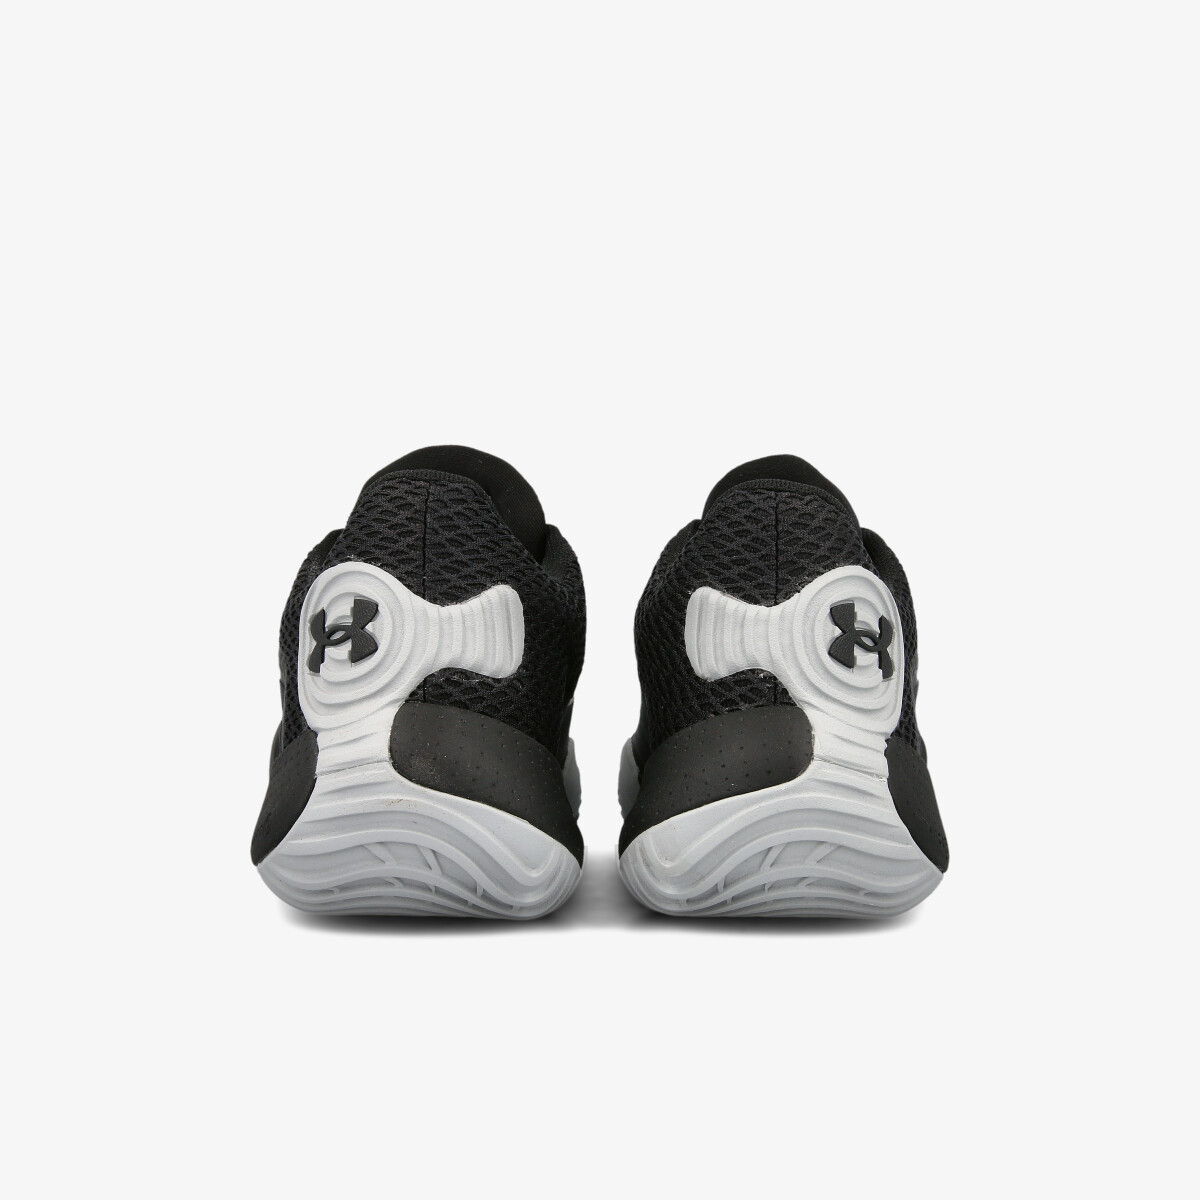 Under Armour Adult UA Spawn 2 Basketball Shoes 